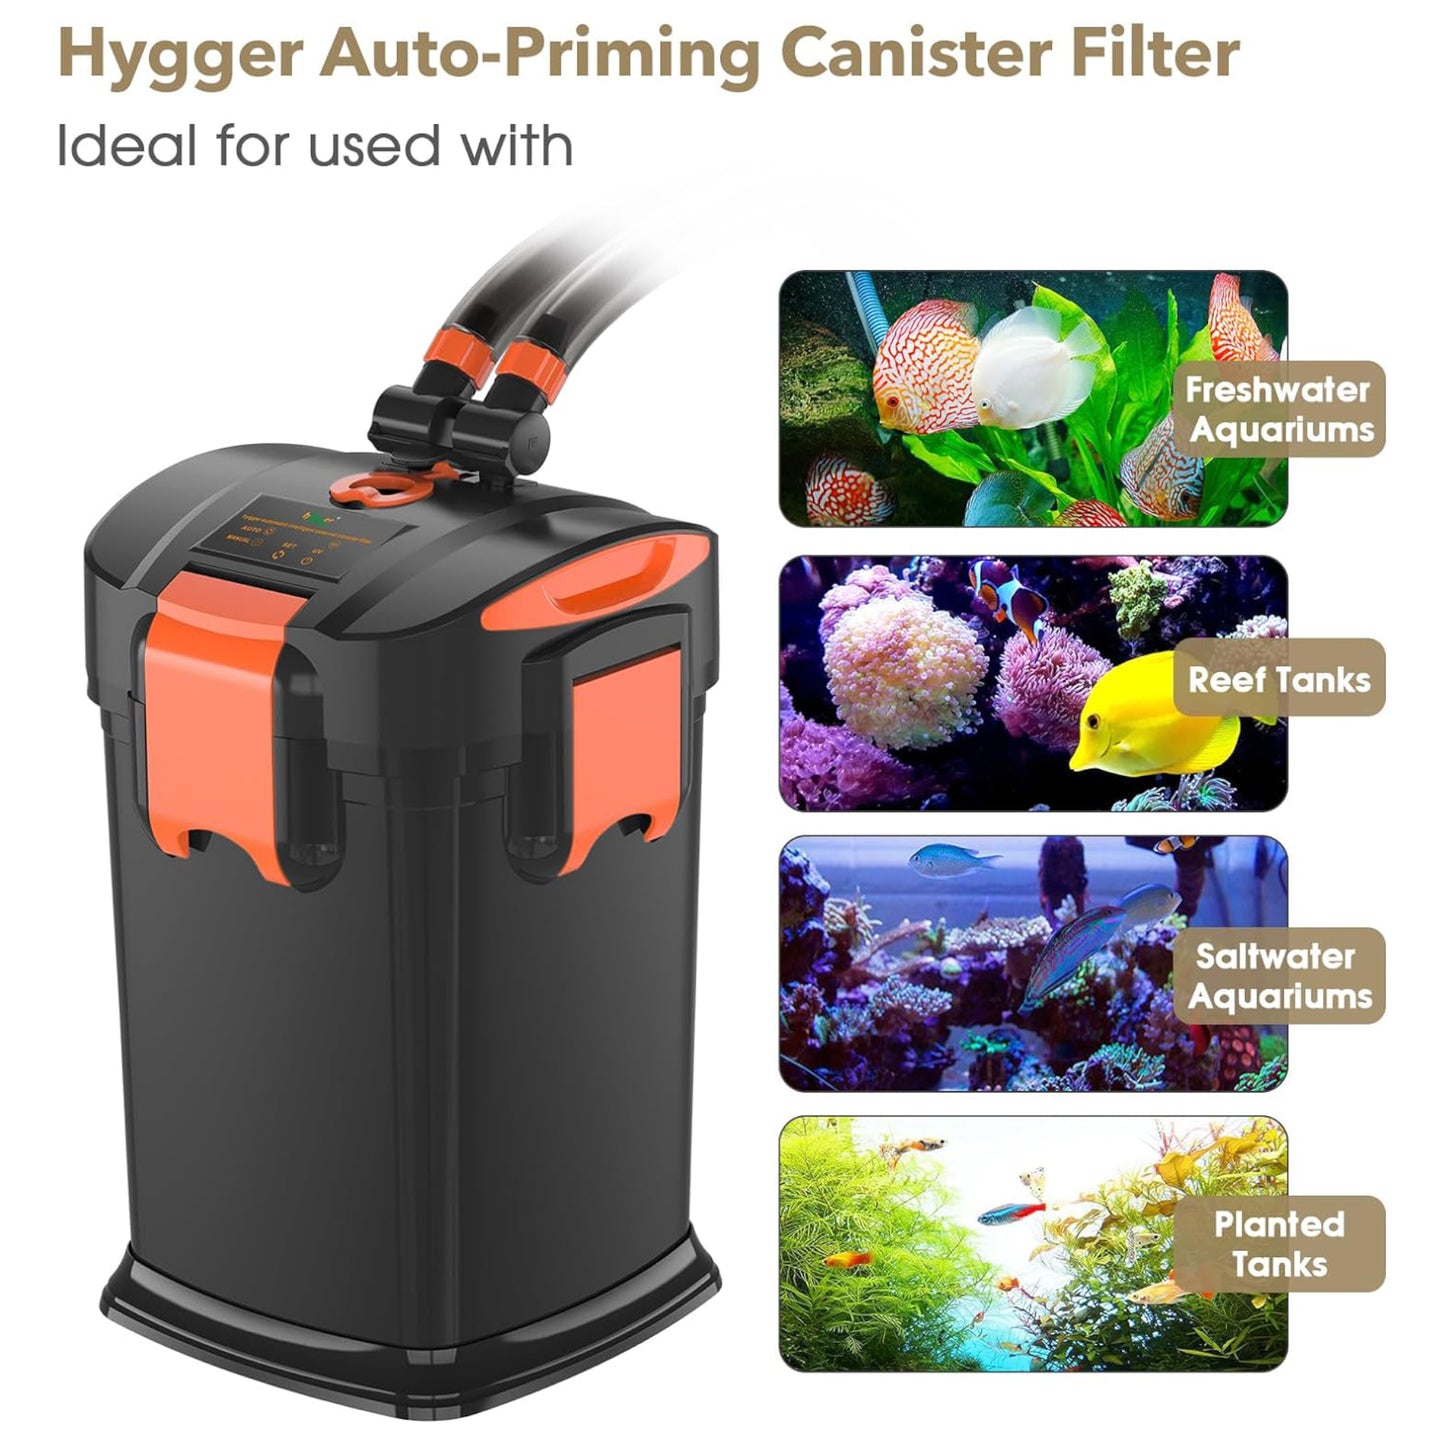 Hygger Ultra-Quiet Canister Filter with UV Sterilizer 1200L